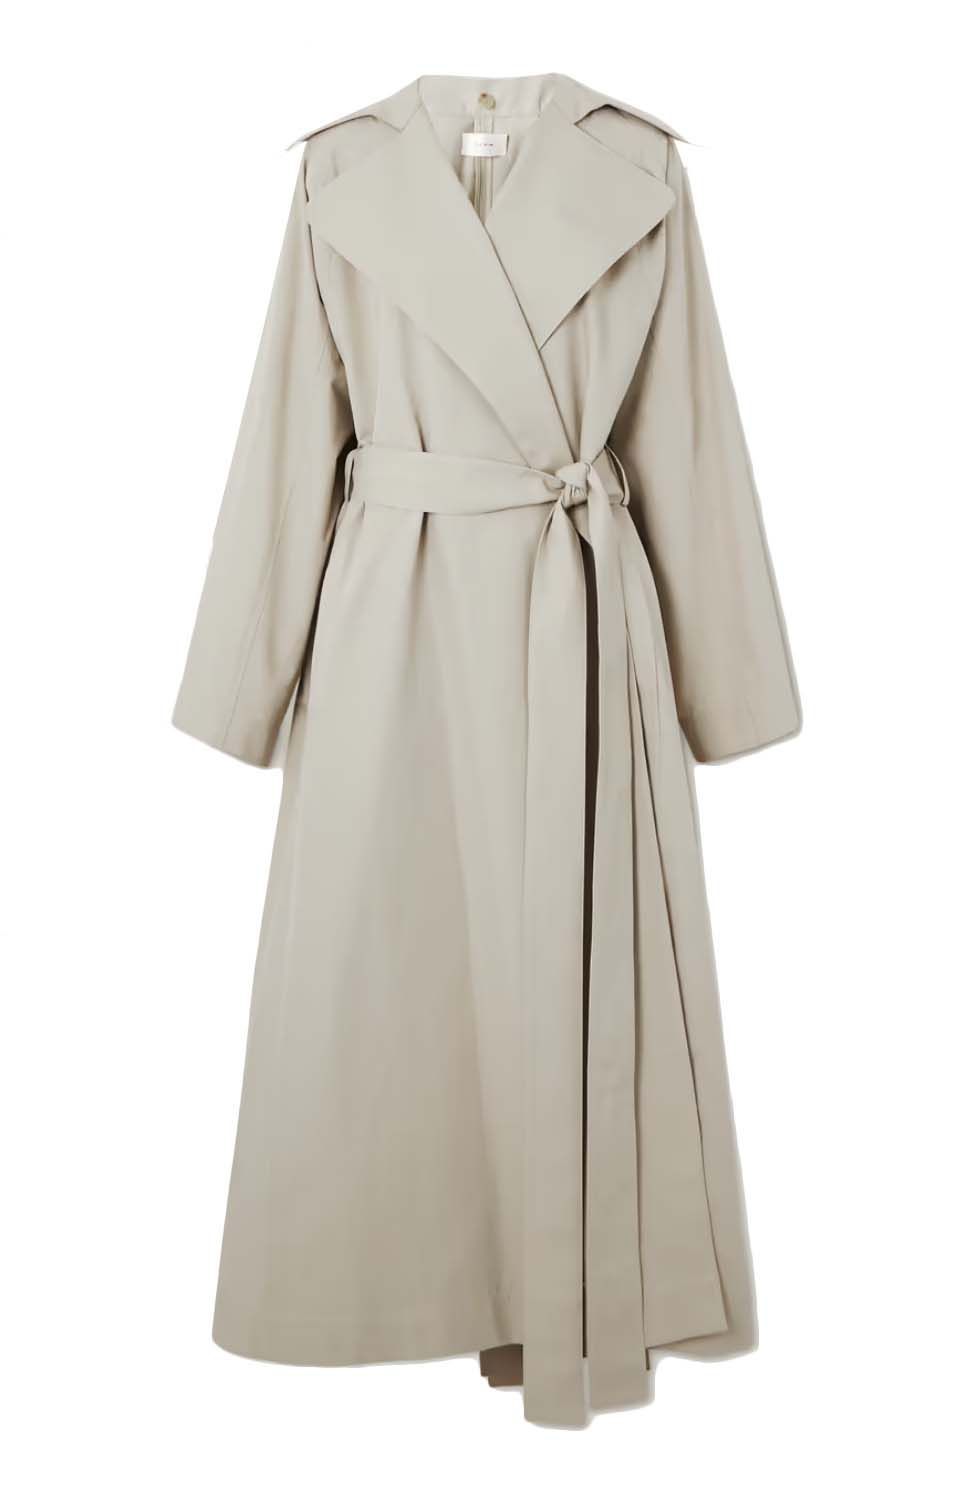 The 5 Best Duster Coats to Dust Those Shoulders Off! (2021)